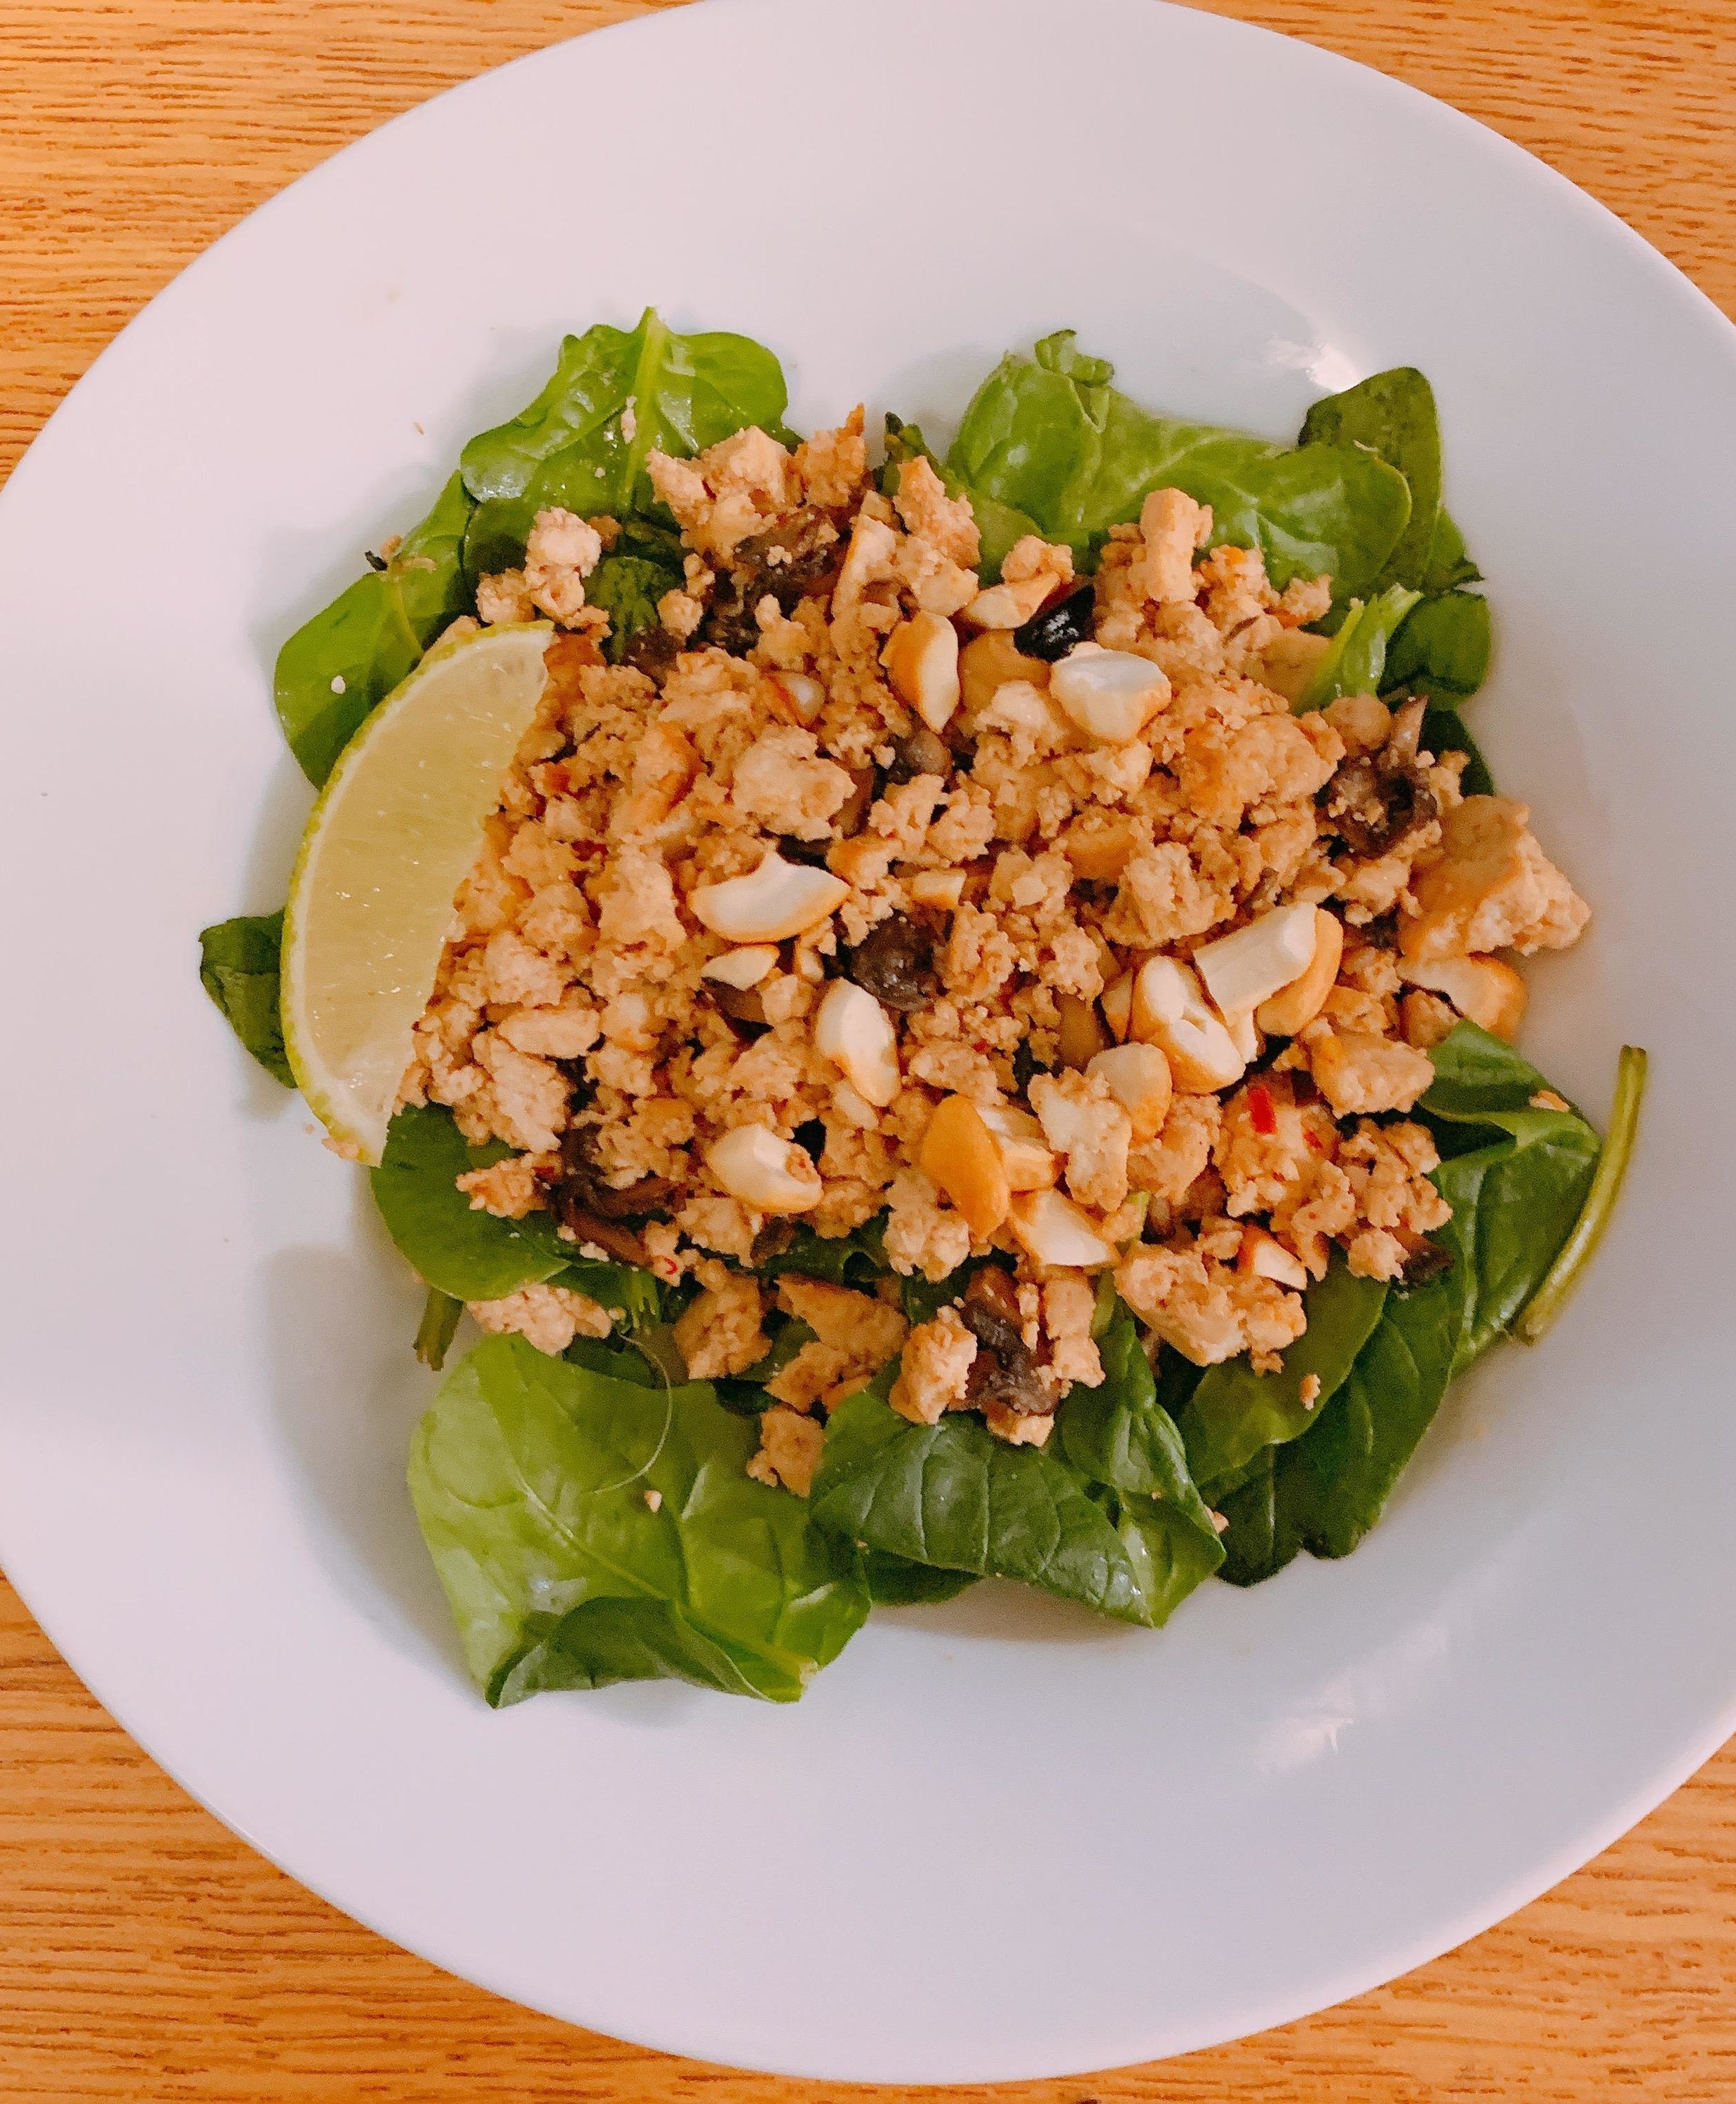 lettuce wraps filled with crumbled tofu and peanut mixture, with lime wedges for squeezing